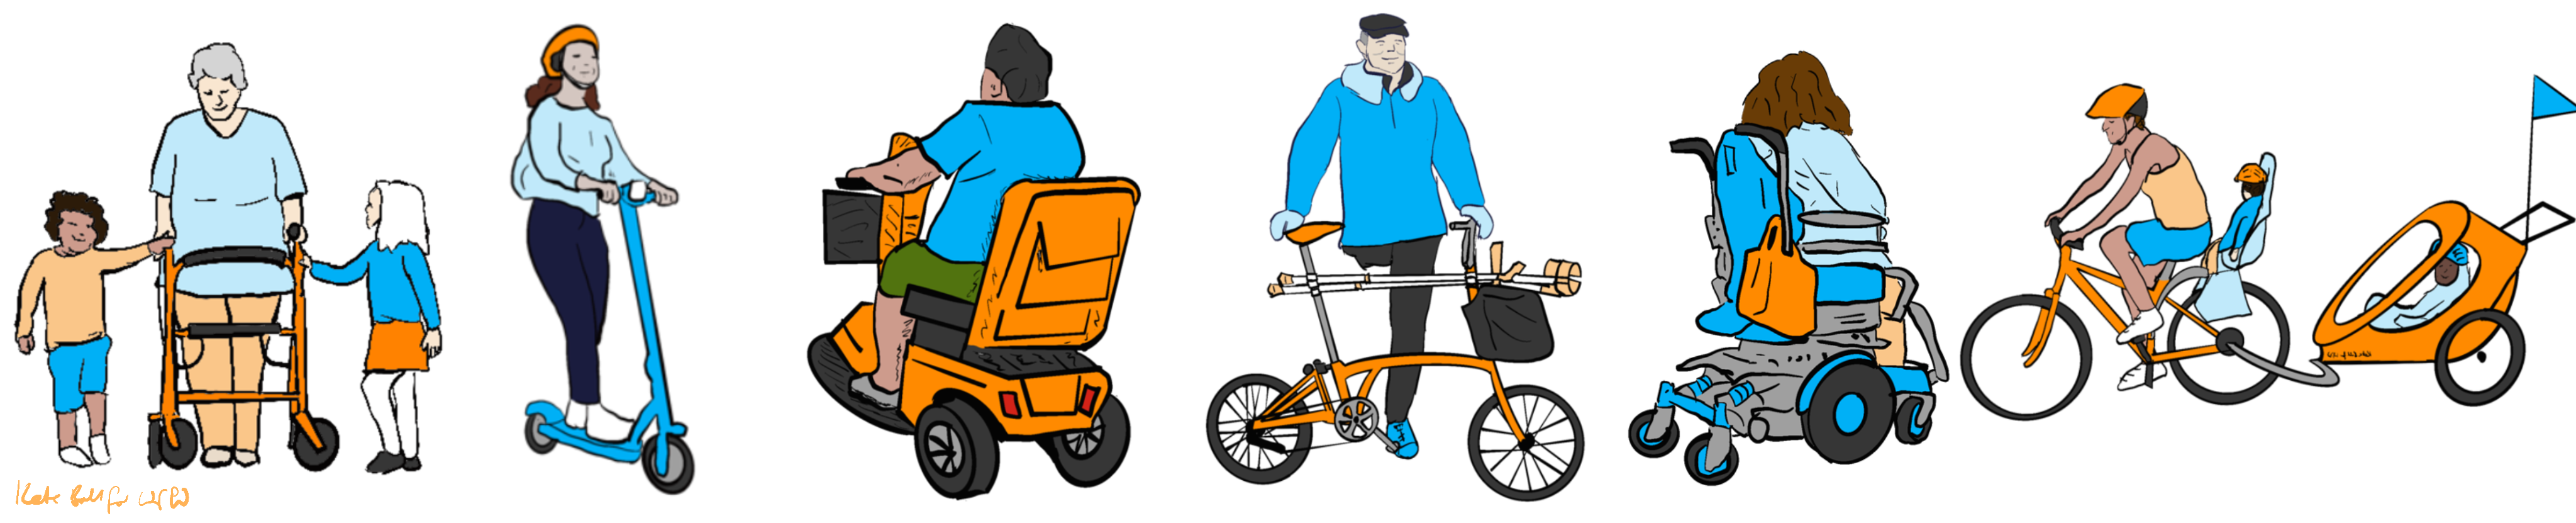 Six e-powered active travel options for Disabled people. From left to right, two children walking with an adult, who is using a rollator walking frame; a person standing to ride an e-scooter, a person riding a mobility scooter, a person standing beside a folding bicycle which has crutches clipped to the frame, a person using a powerchair, an adult riding a bicycle with one child on a rear seat and another in a trailer towed behind.